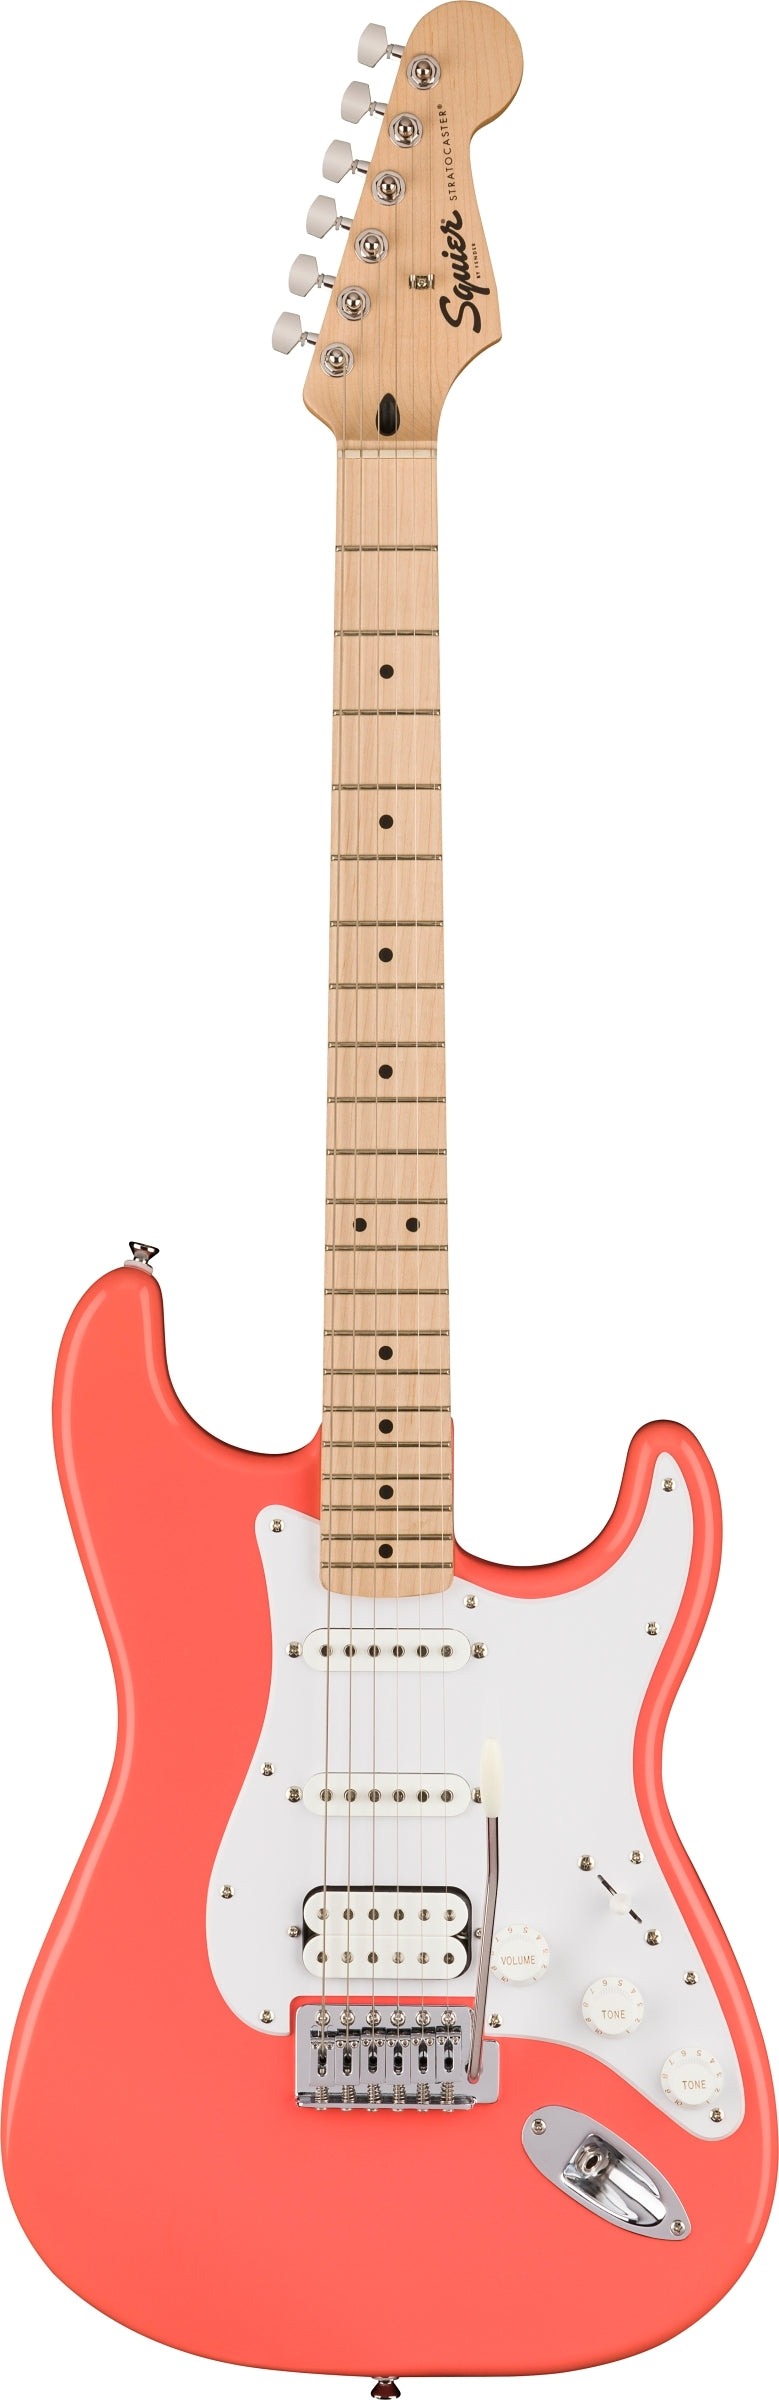 Squier Sonic Stratocaster Solidbody Electric Guitar  - Tahitian Coral